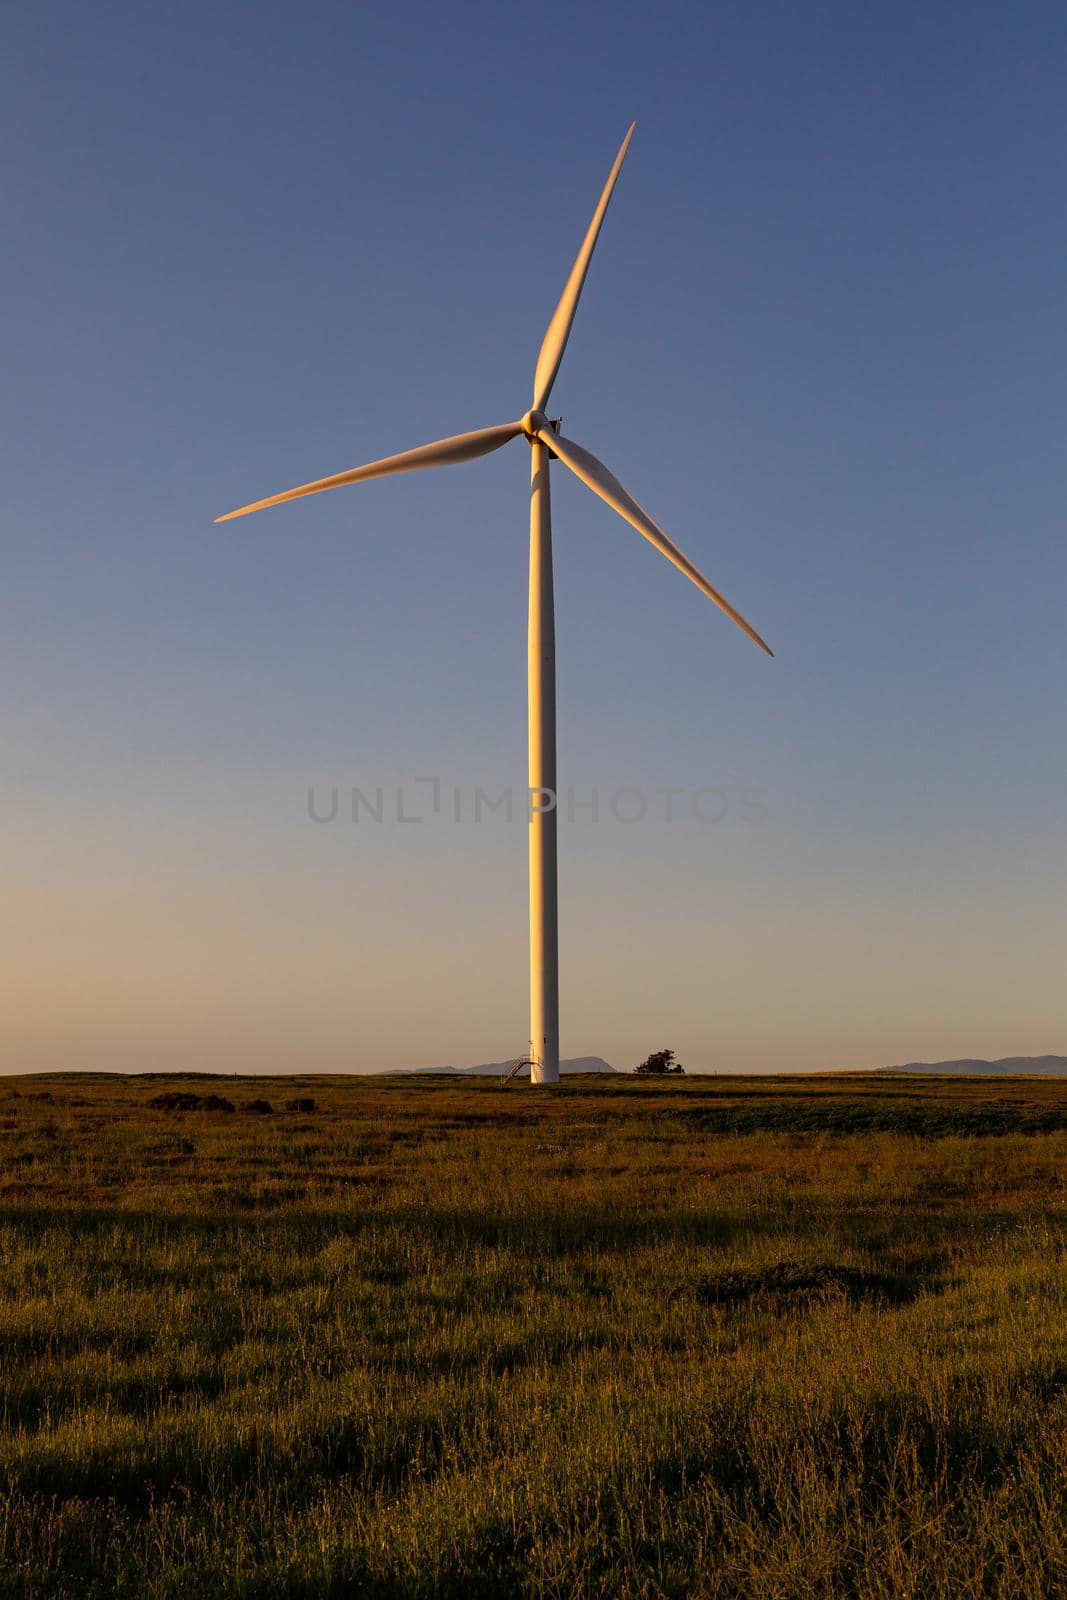 General view of wind turbine in countryside landscape with cloudless sky. environment, sustainability, ecology, renewable energy, global warming and climate change awareness.